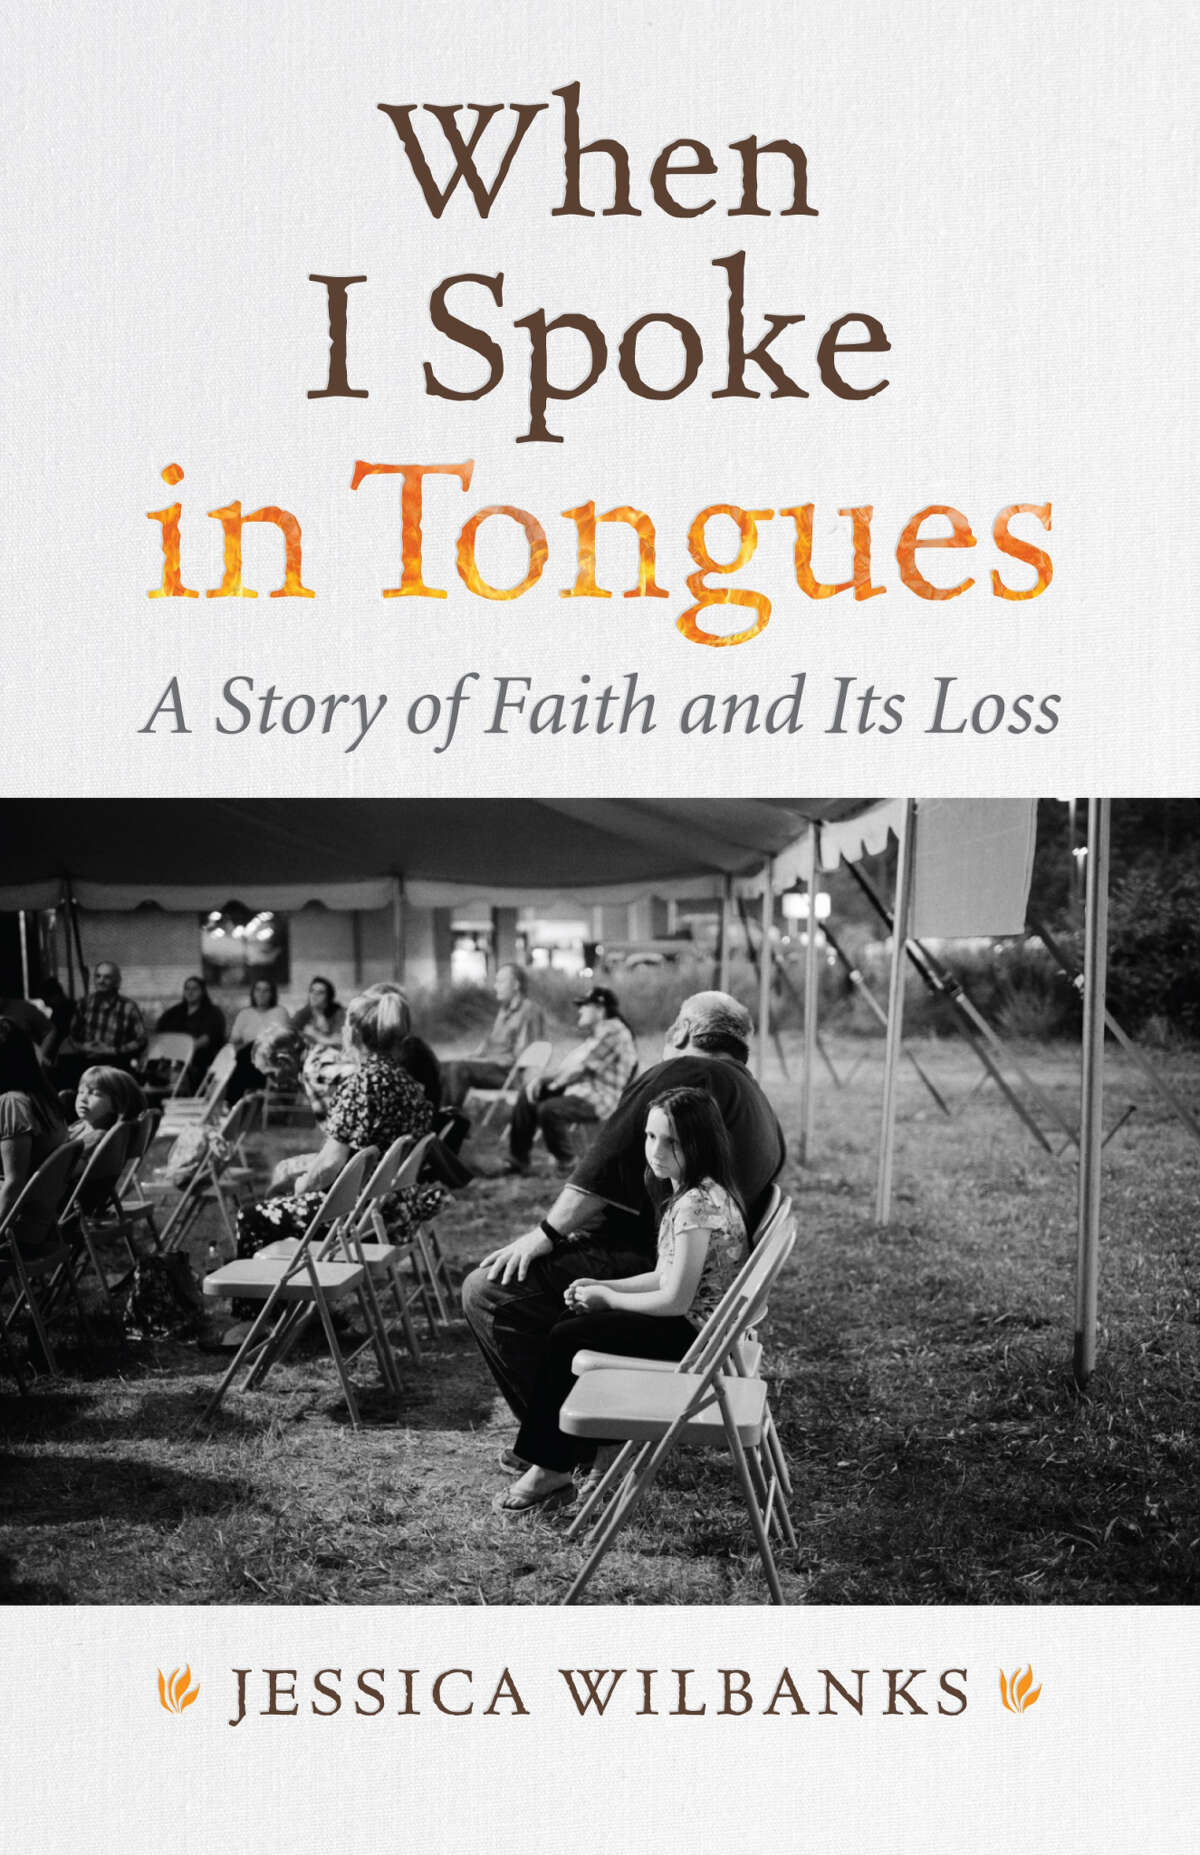 "When I Spoke in Tongues" was published in November 18 by Beacon Press.